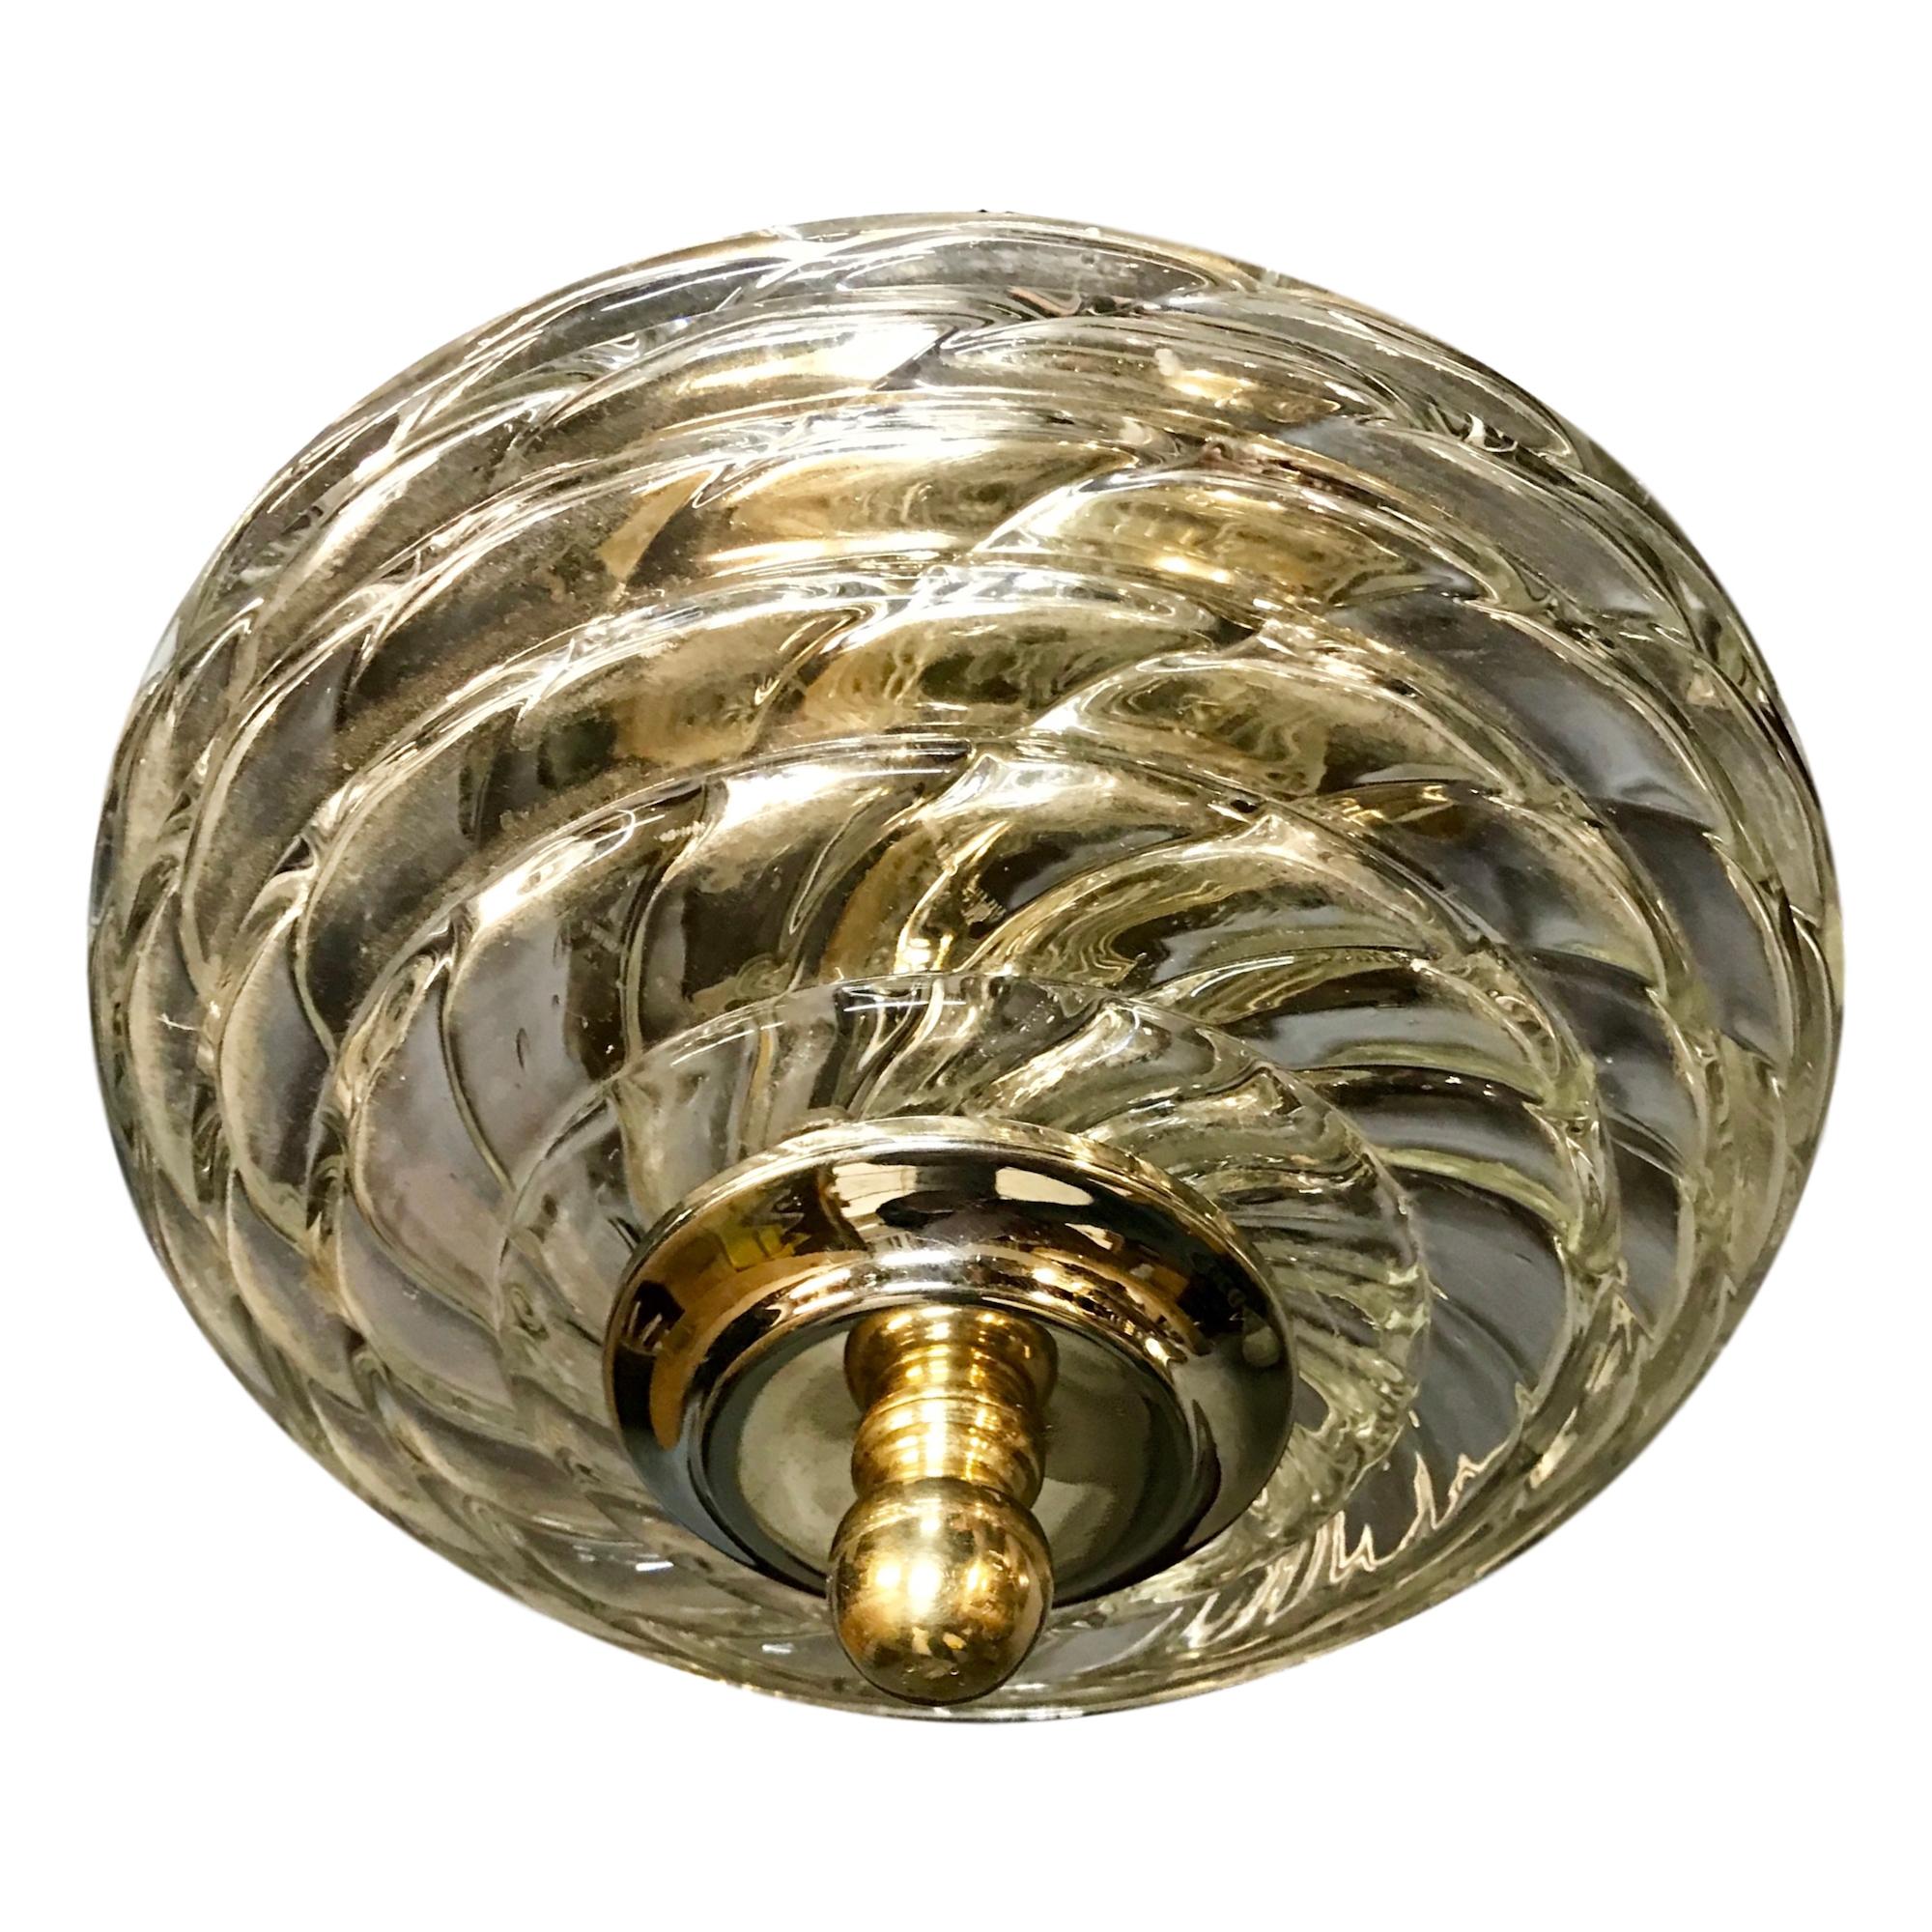 A circa 1950s Murano glass flushmount ceiling fixtures with interior light.

Measurements:
Drop 6